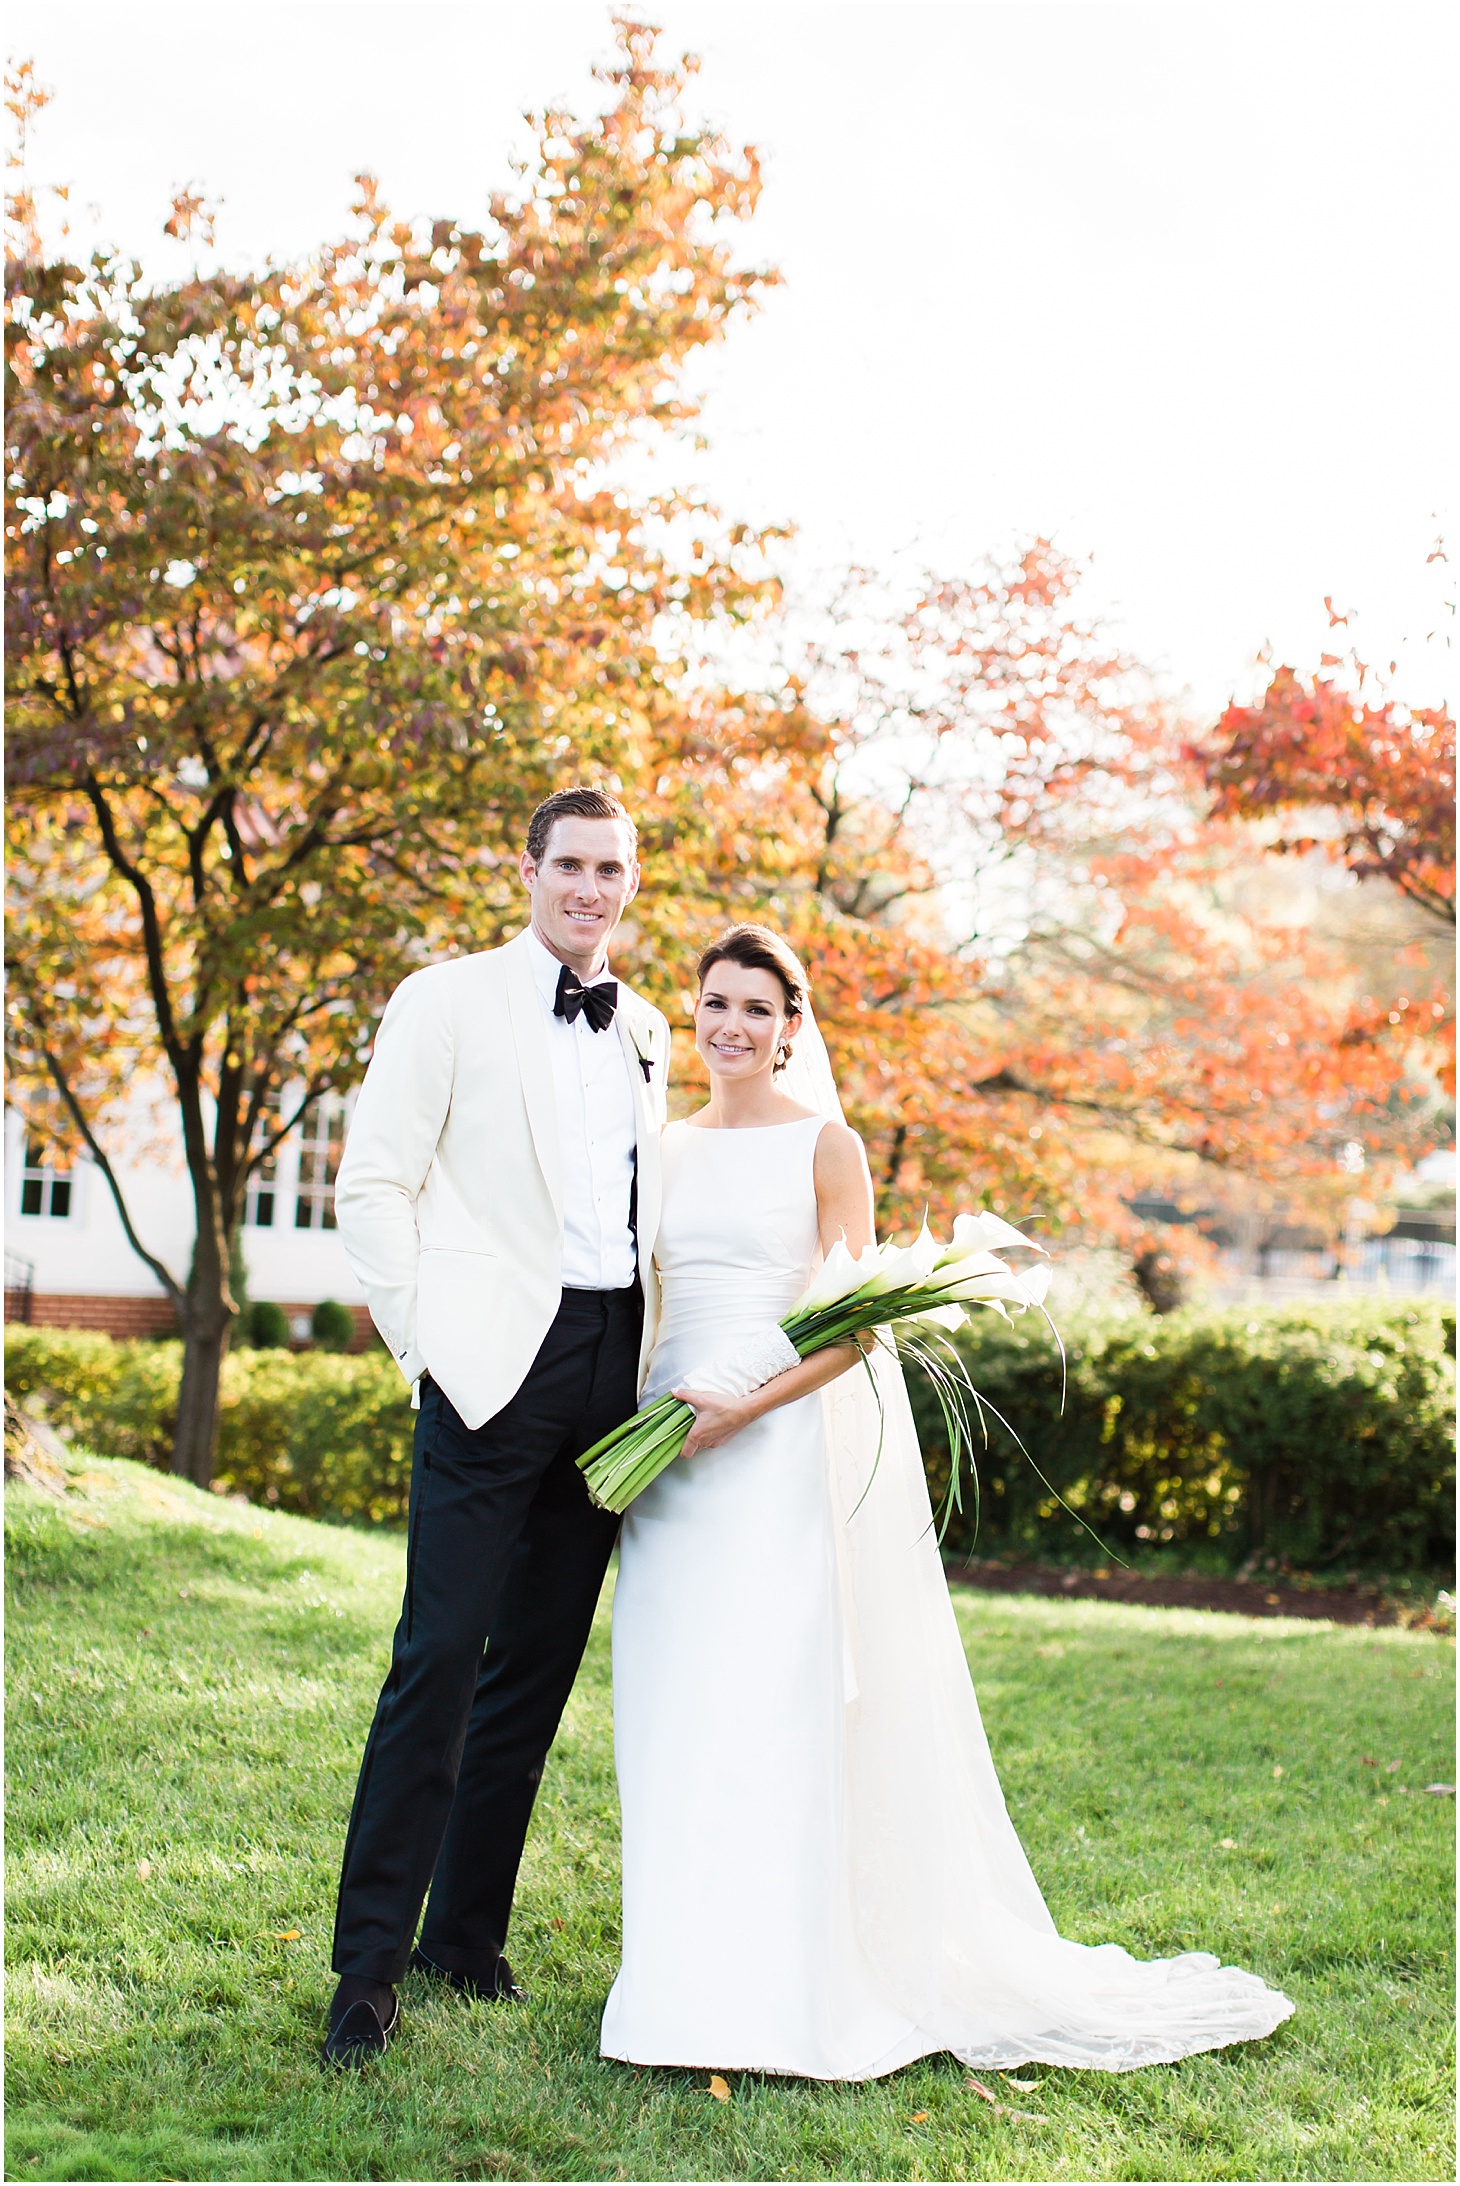 Wedding Portraits at Columbia Country Club | Wedding Ceremony at Cathedral of St. Matthew the Apostle | Classy October Wedding in Washington, D.C. | Sarah Bradshaw Photography